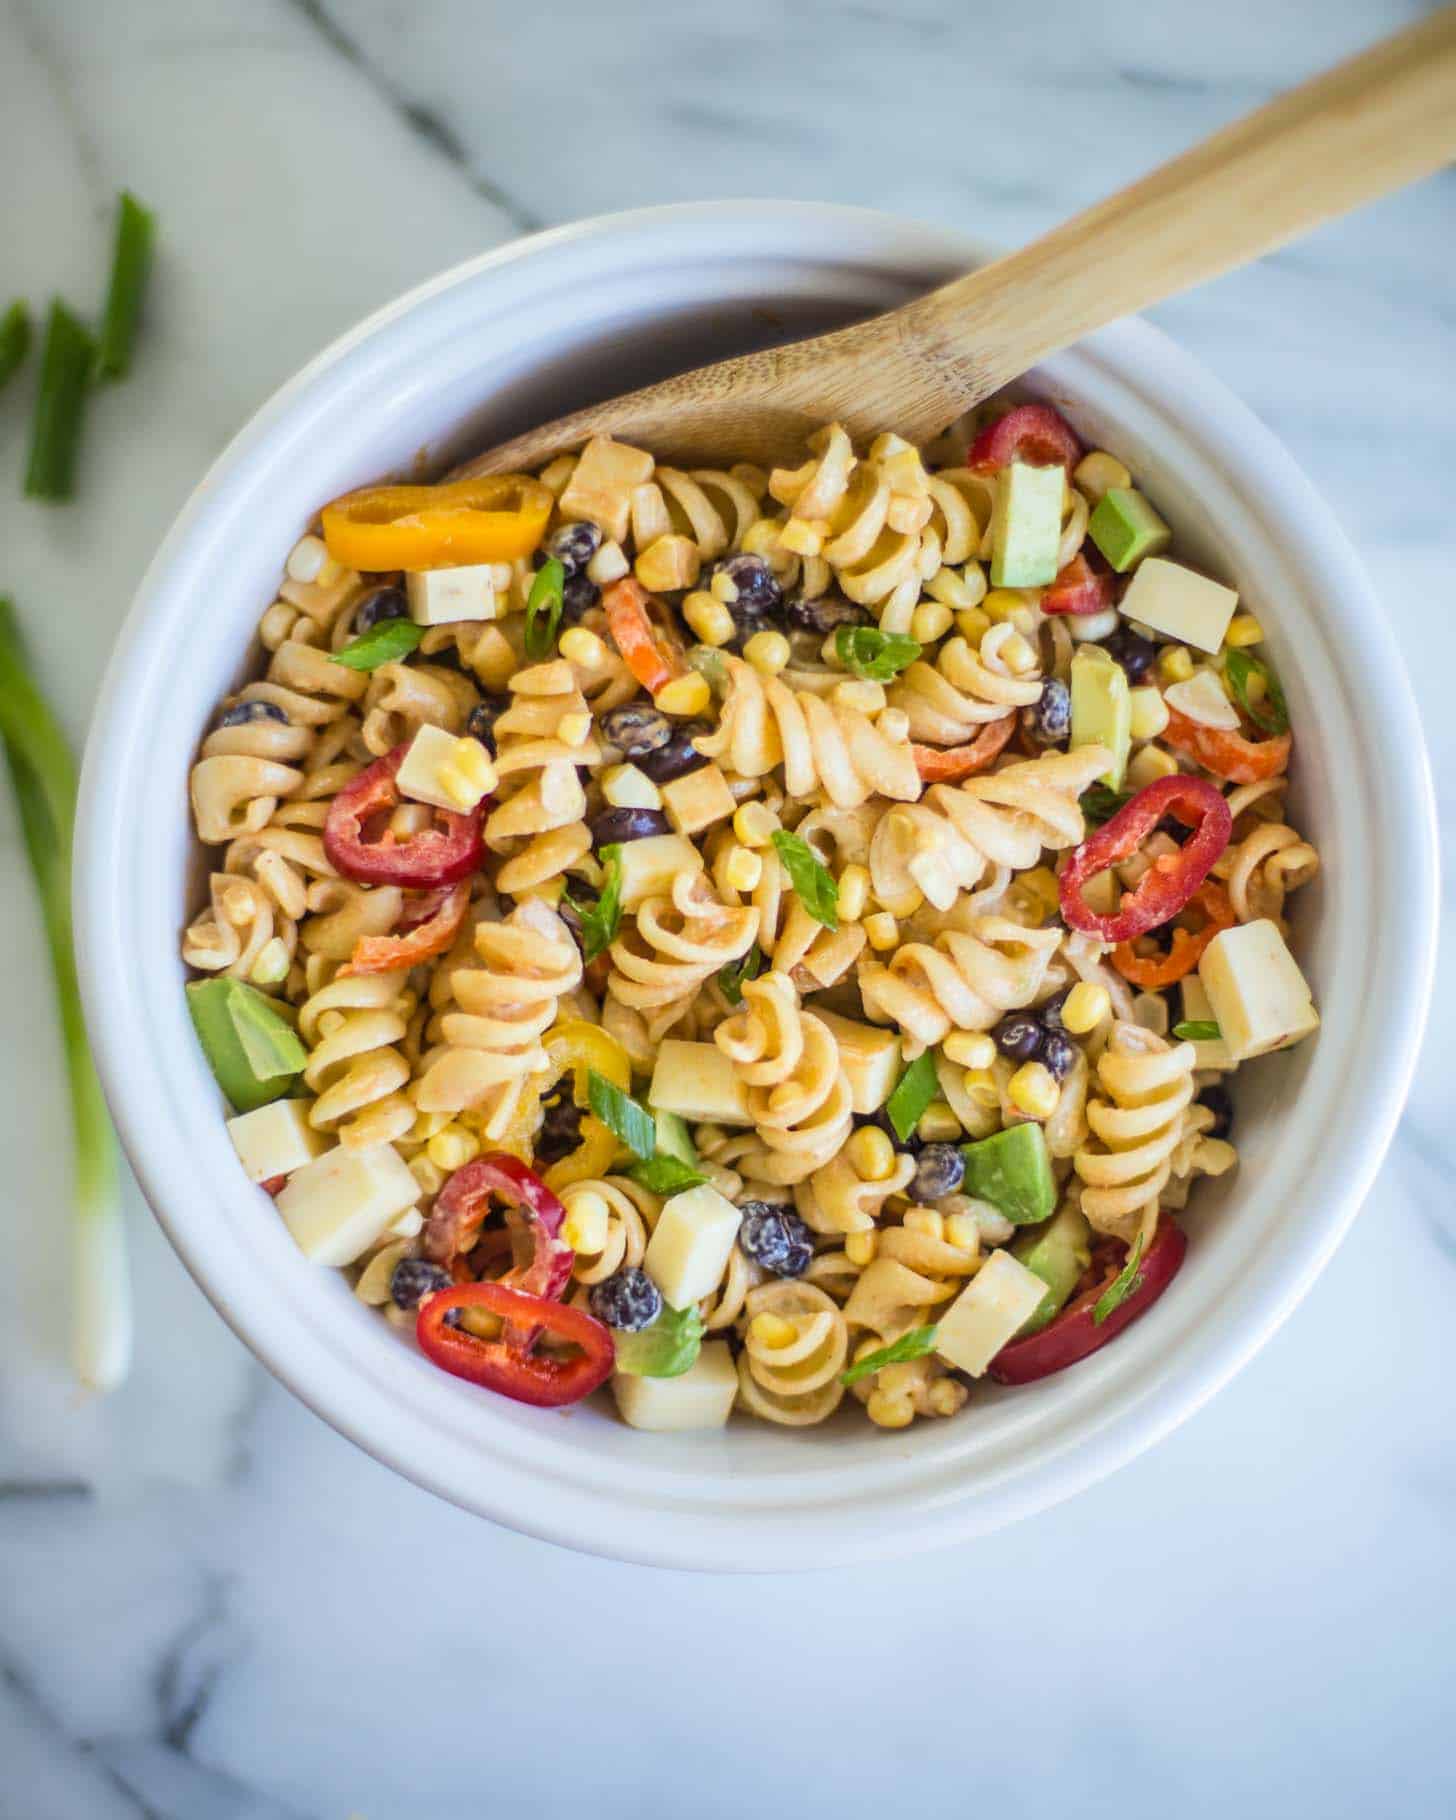 Pasta Salad With Creamy Chipotle Dressing Inquiring Chef,Oval Office Renovation